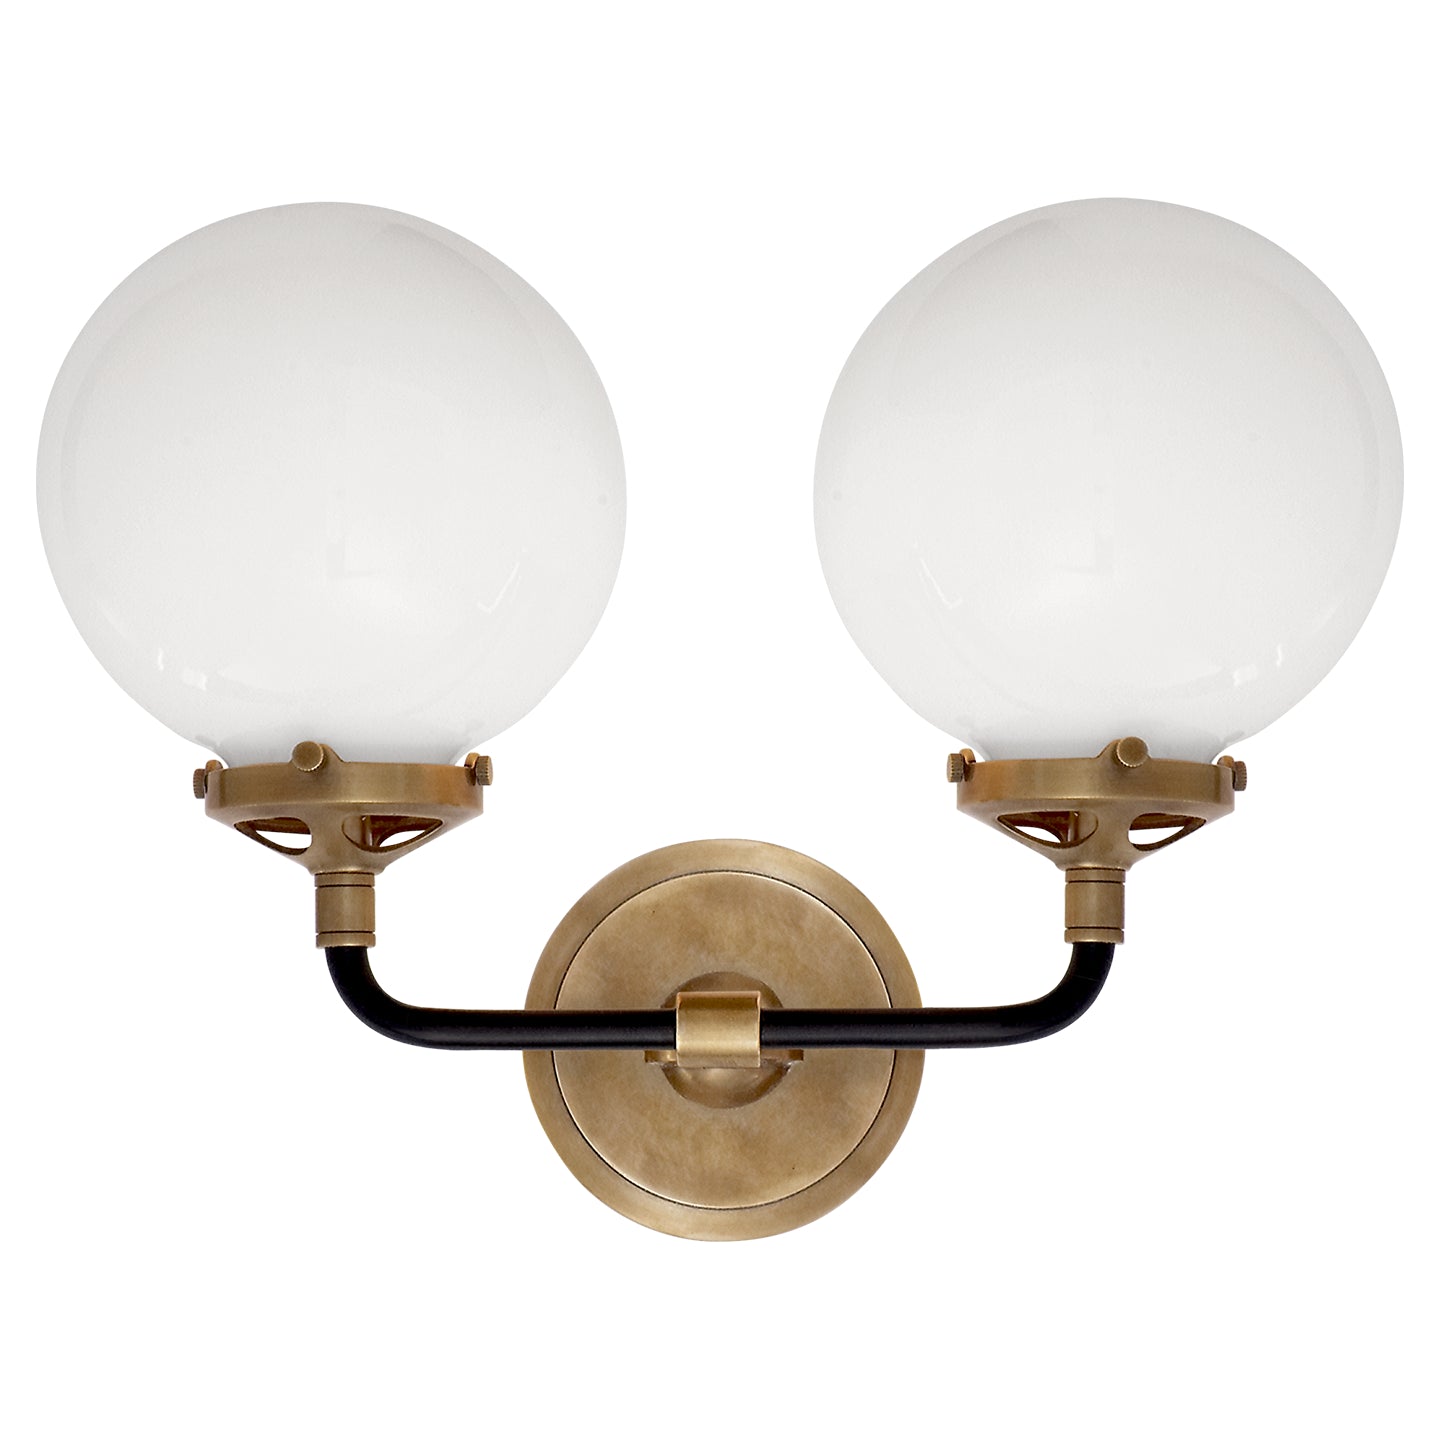 Visual Comfort Signature - S 2026HAB/BLK-WG - Two Light Wall Sconce - Bistro - Hand-Rubbed Antique Brass and Black